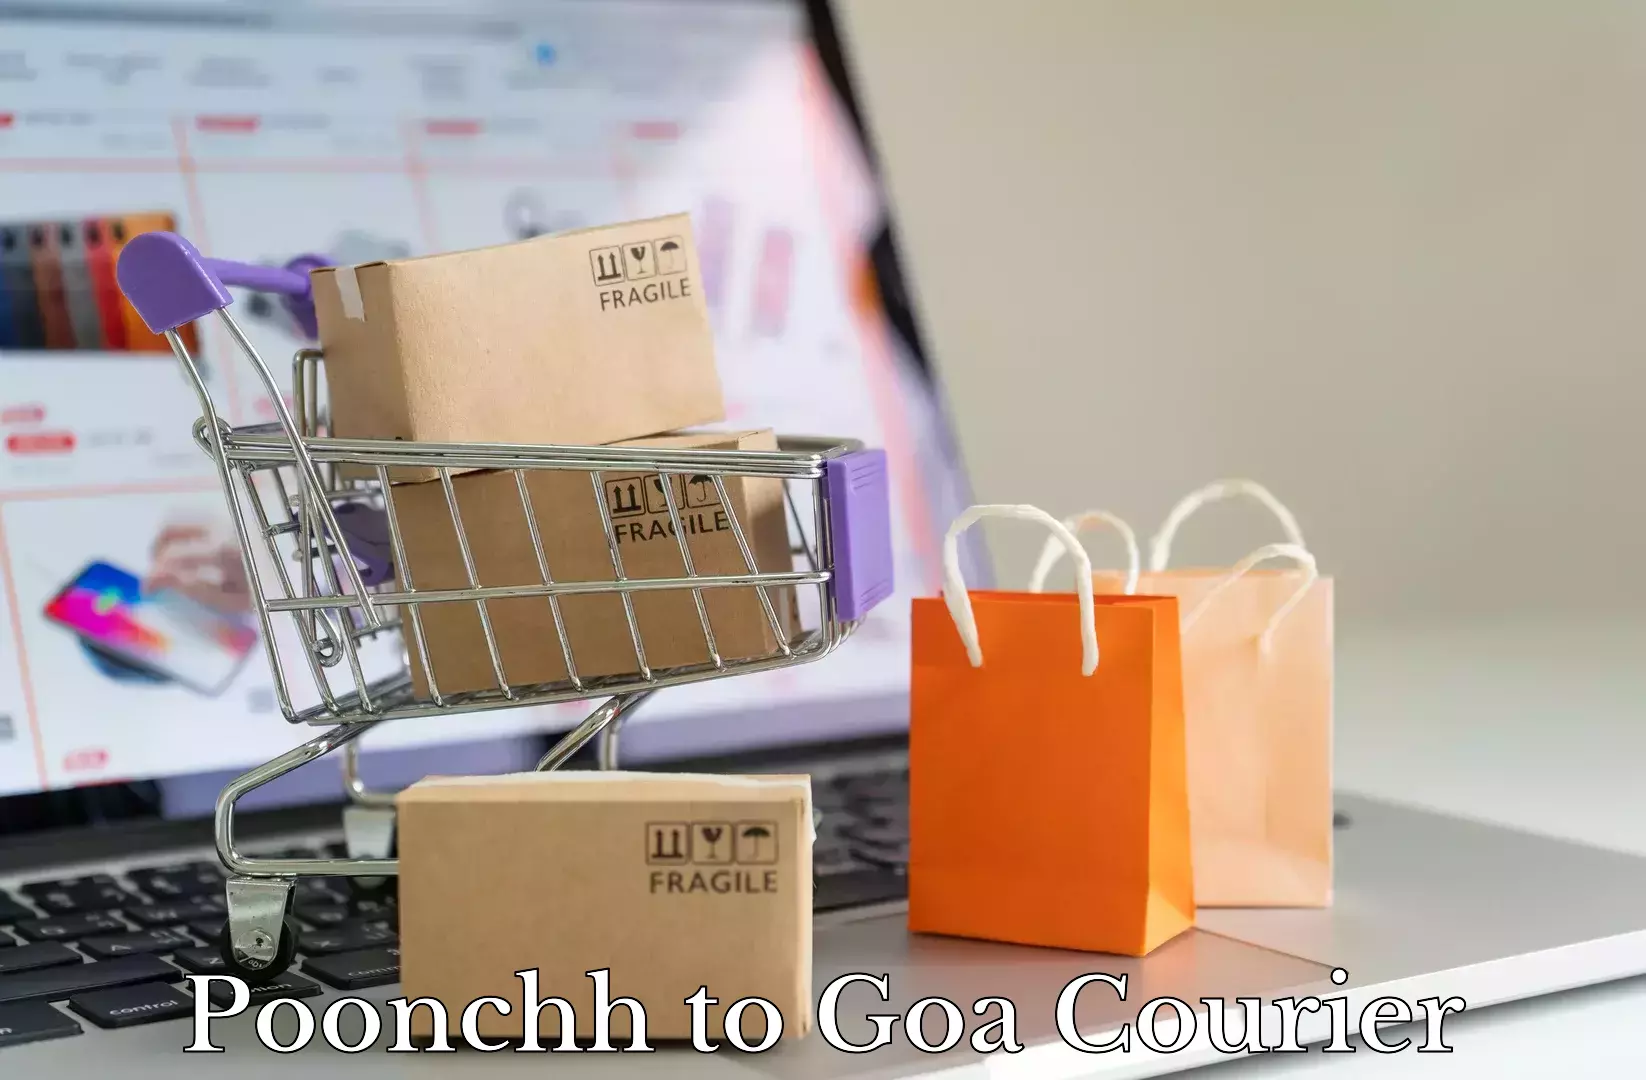 Budget-friendly moving services Poonchh to Goa University